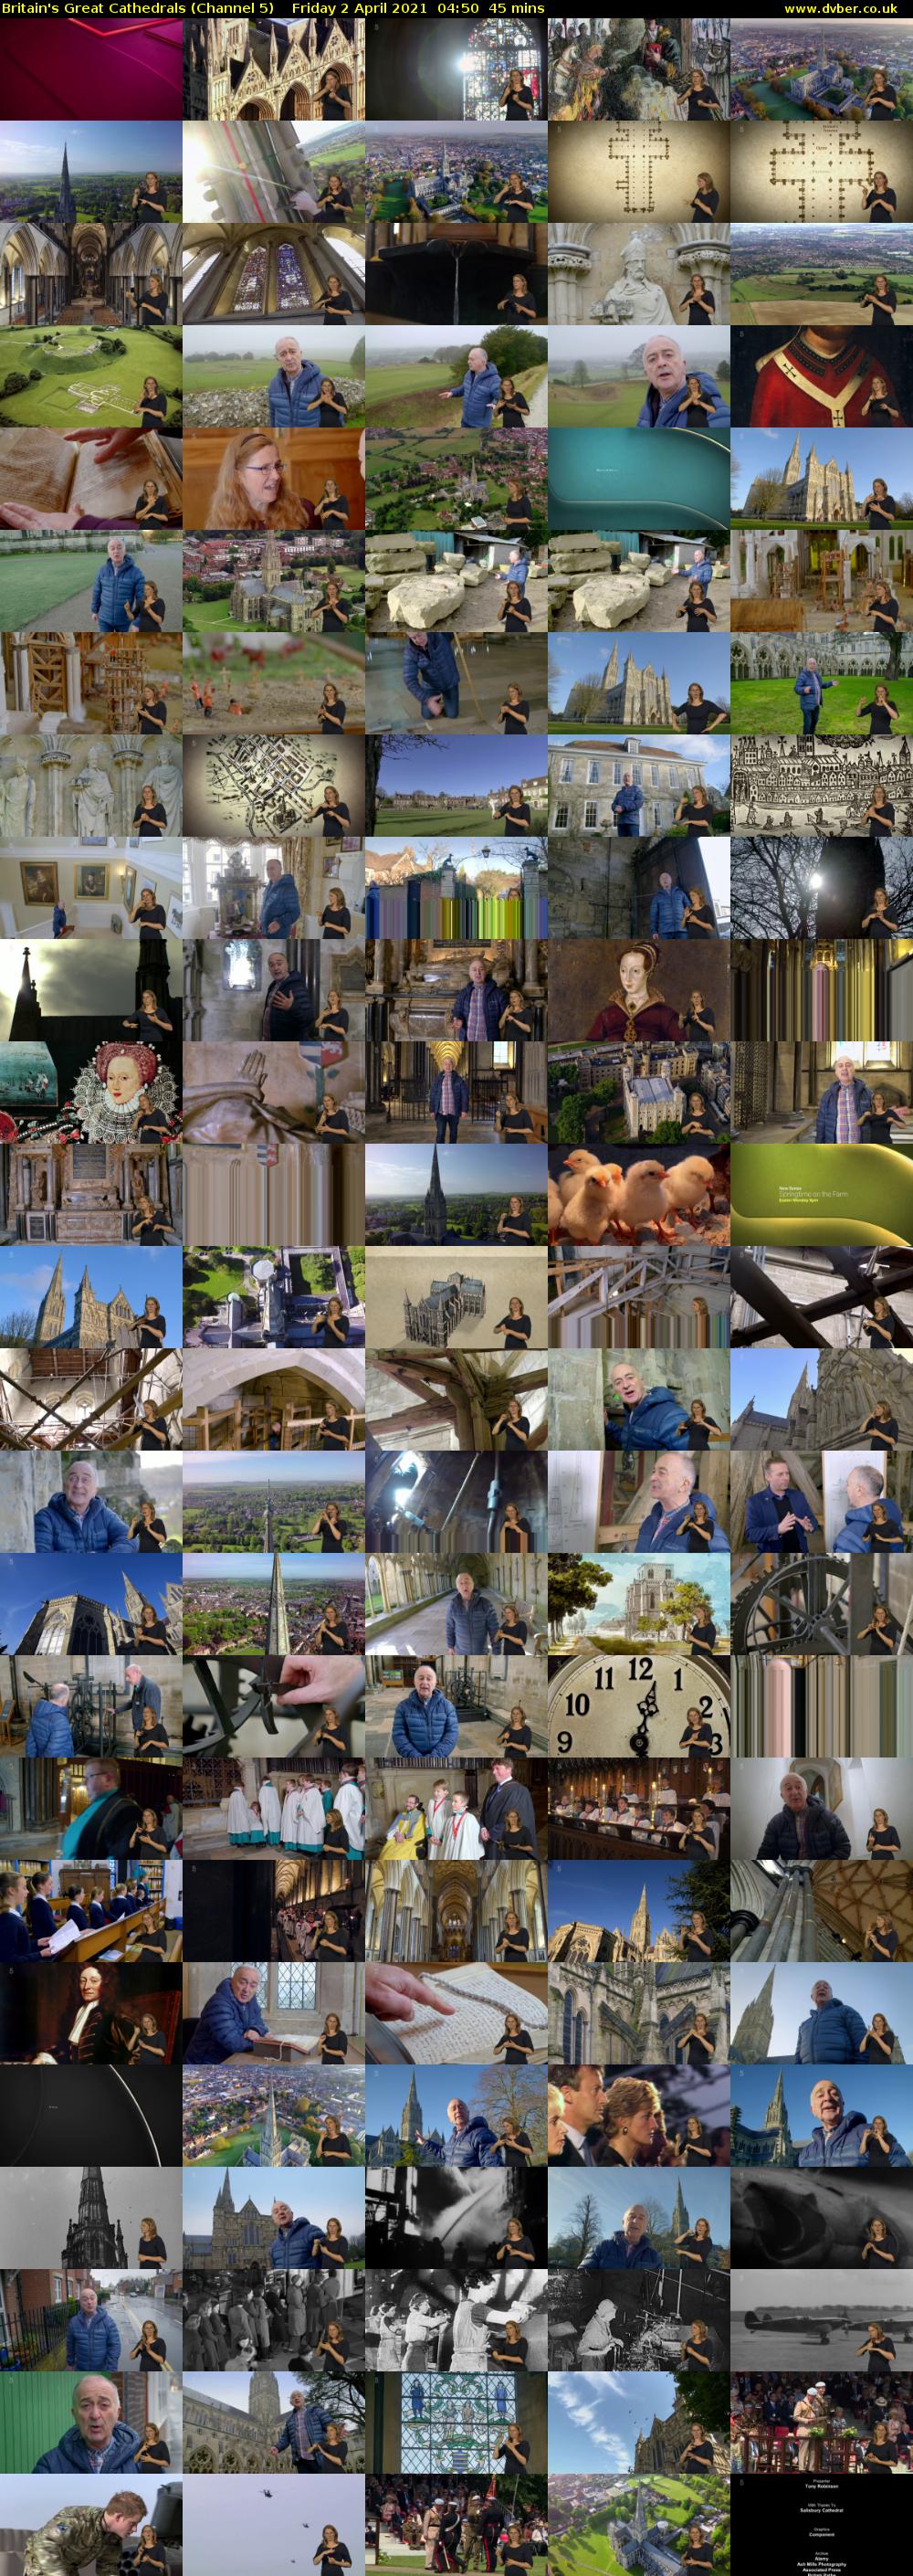 Britain's Great Cathedrals (Channel 5) Friday 2 April 2021 04:50 - 05:35